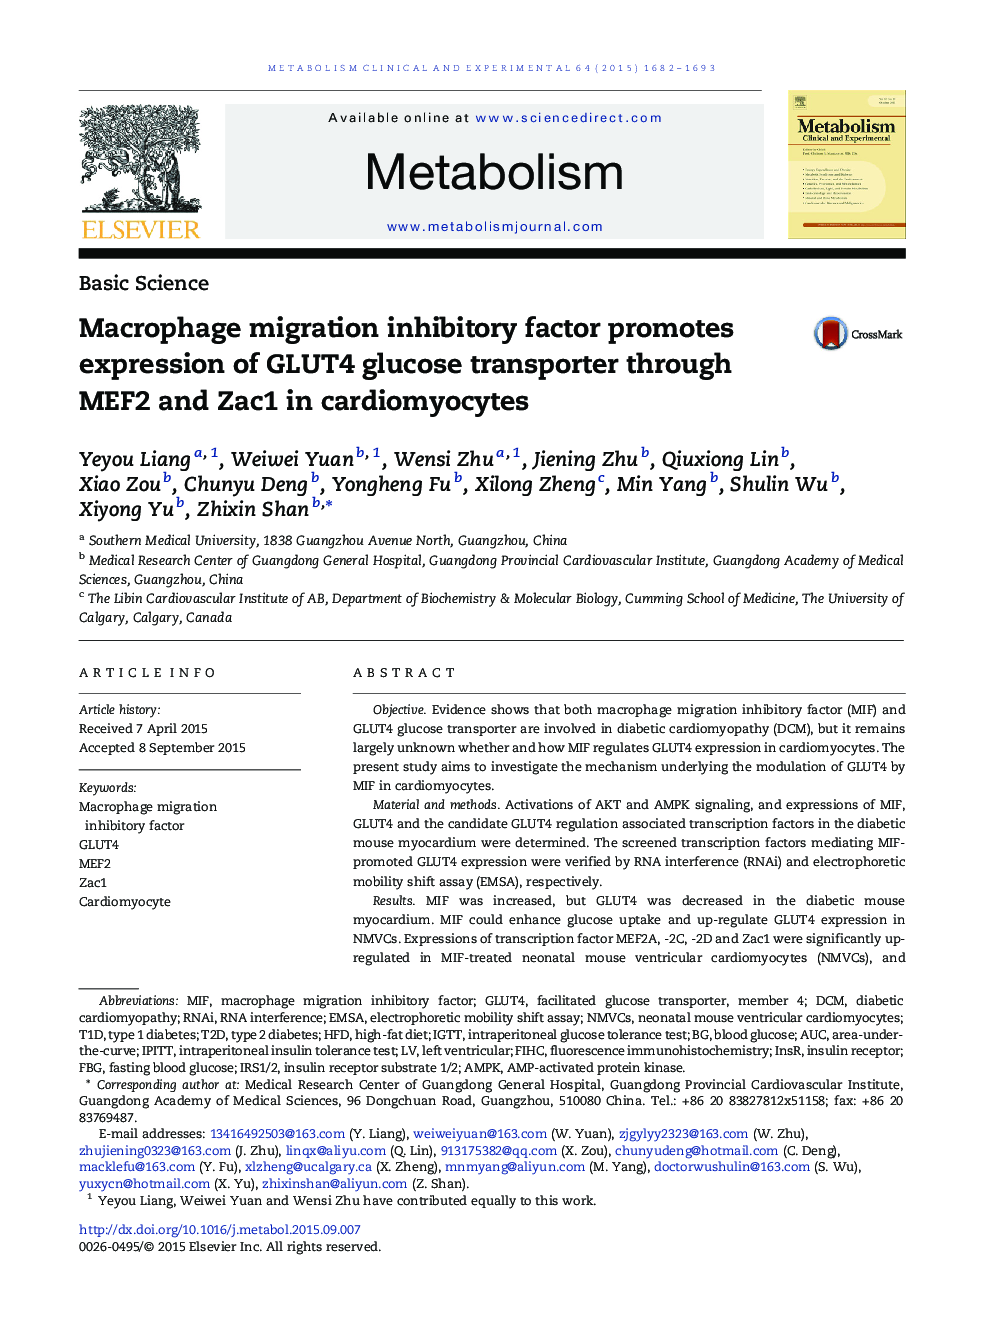 Macrophage migration inhibitory factor promotes expression of GLUT4 glucose transporter through MEF2 and Zac1 in cardiomyocytes